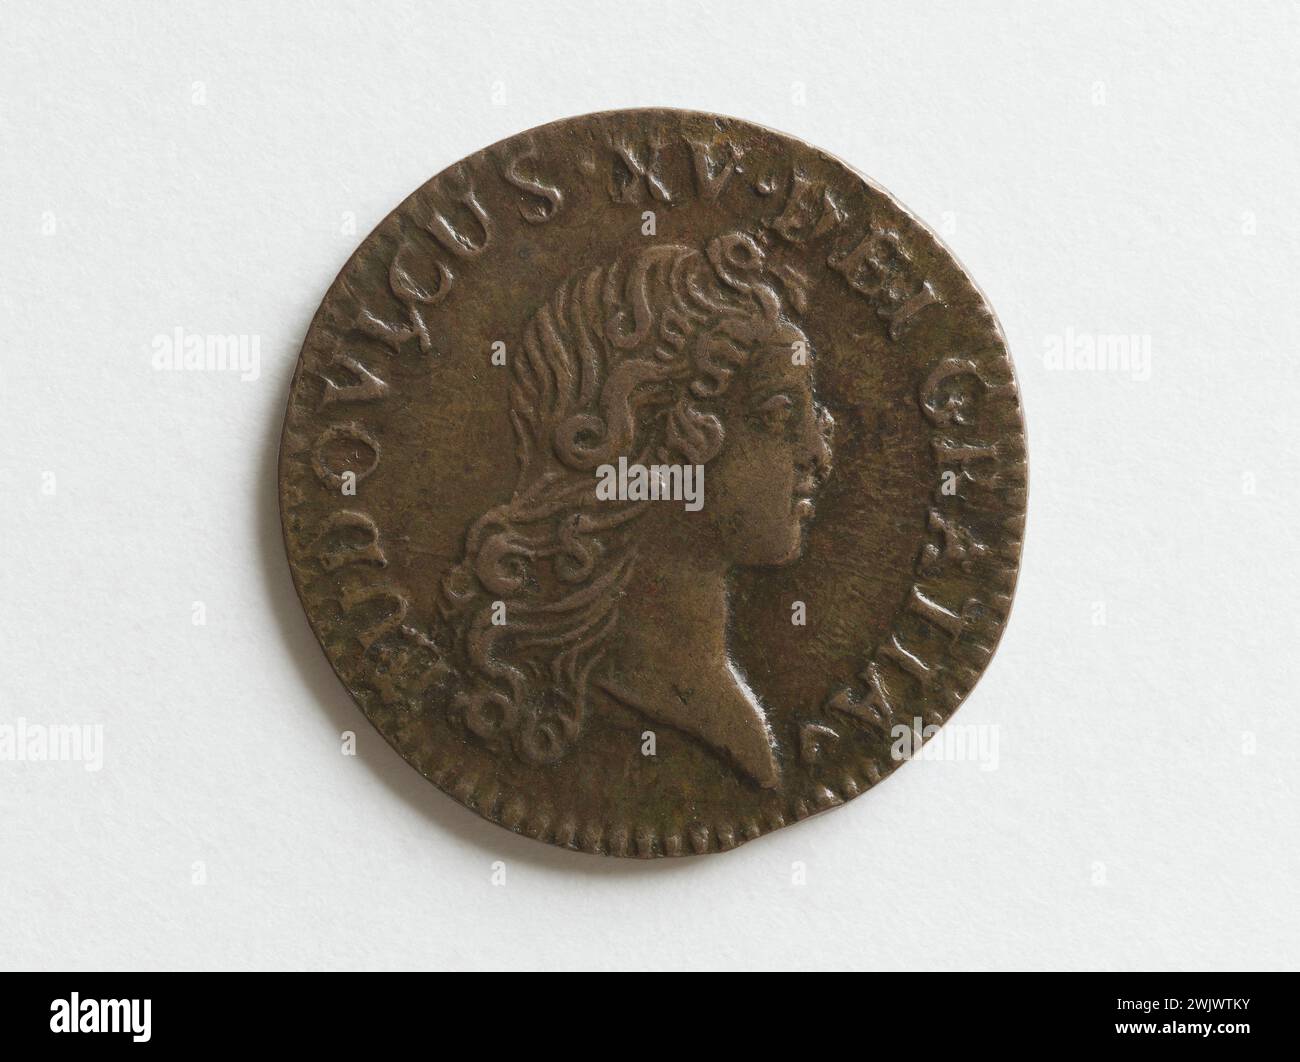 Norbert Roettiers (1666-1727). Liard de Louis XV, 1720. Cuper, 1720. Paris, Carnavalet Museum. Numismatics, currency room, 18th 18th 18th 18th 18th 18th 18 century, part Stock Photo